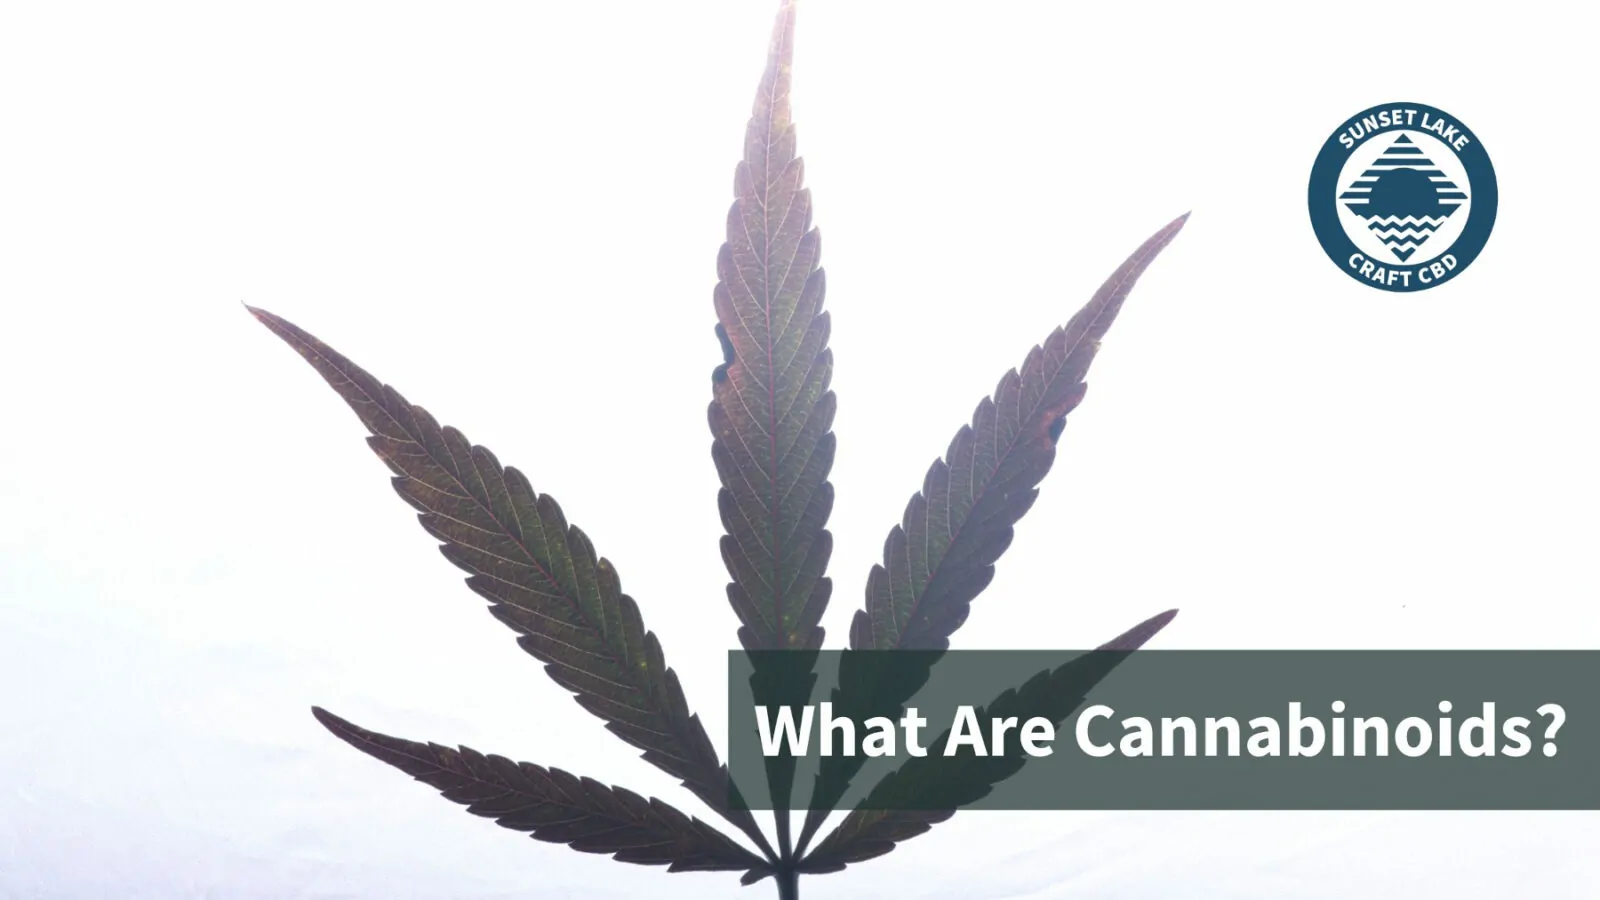 What Are Cannabinoids? A Brief Introduction